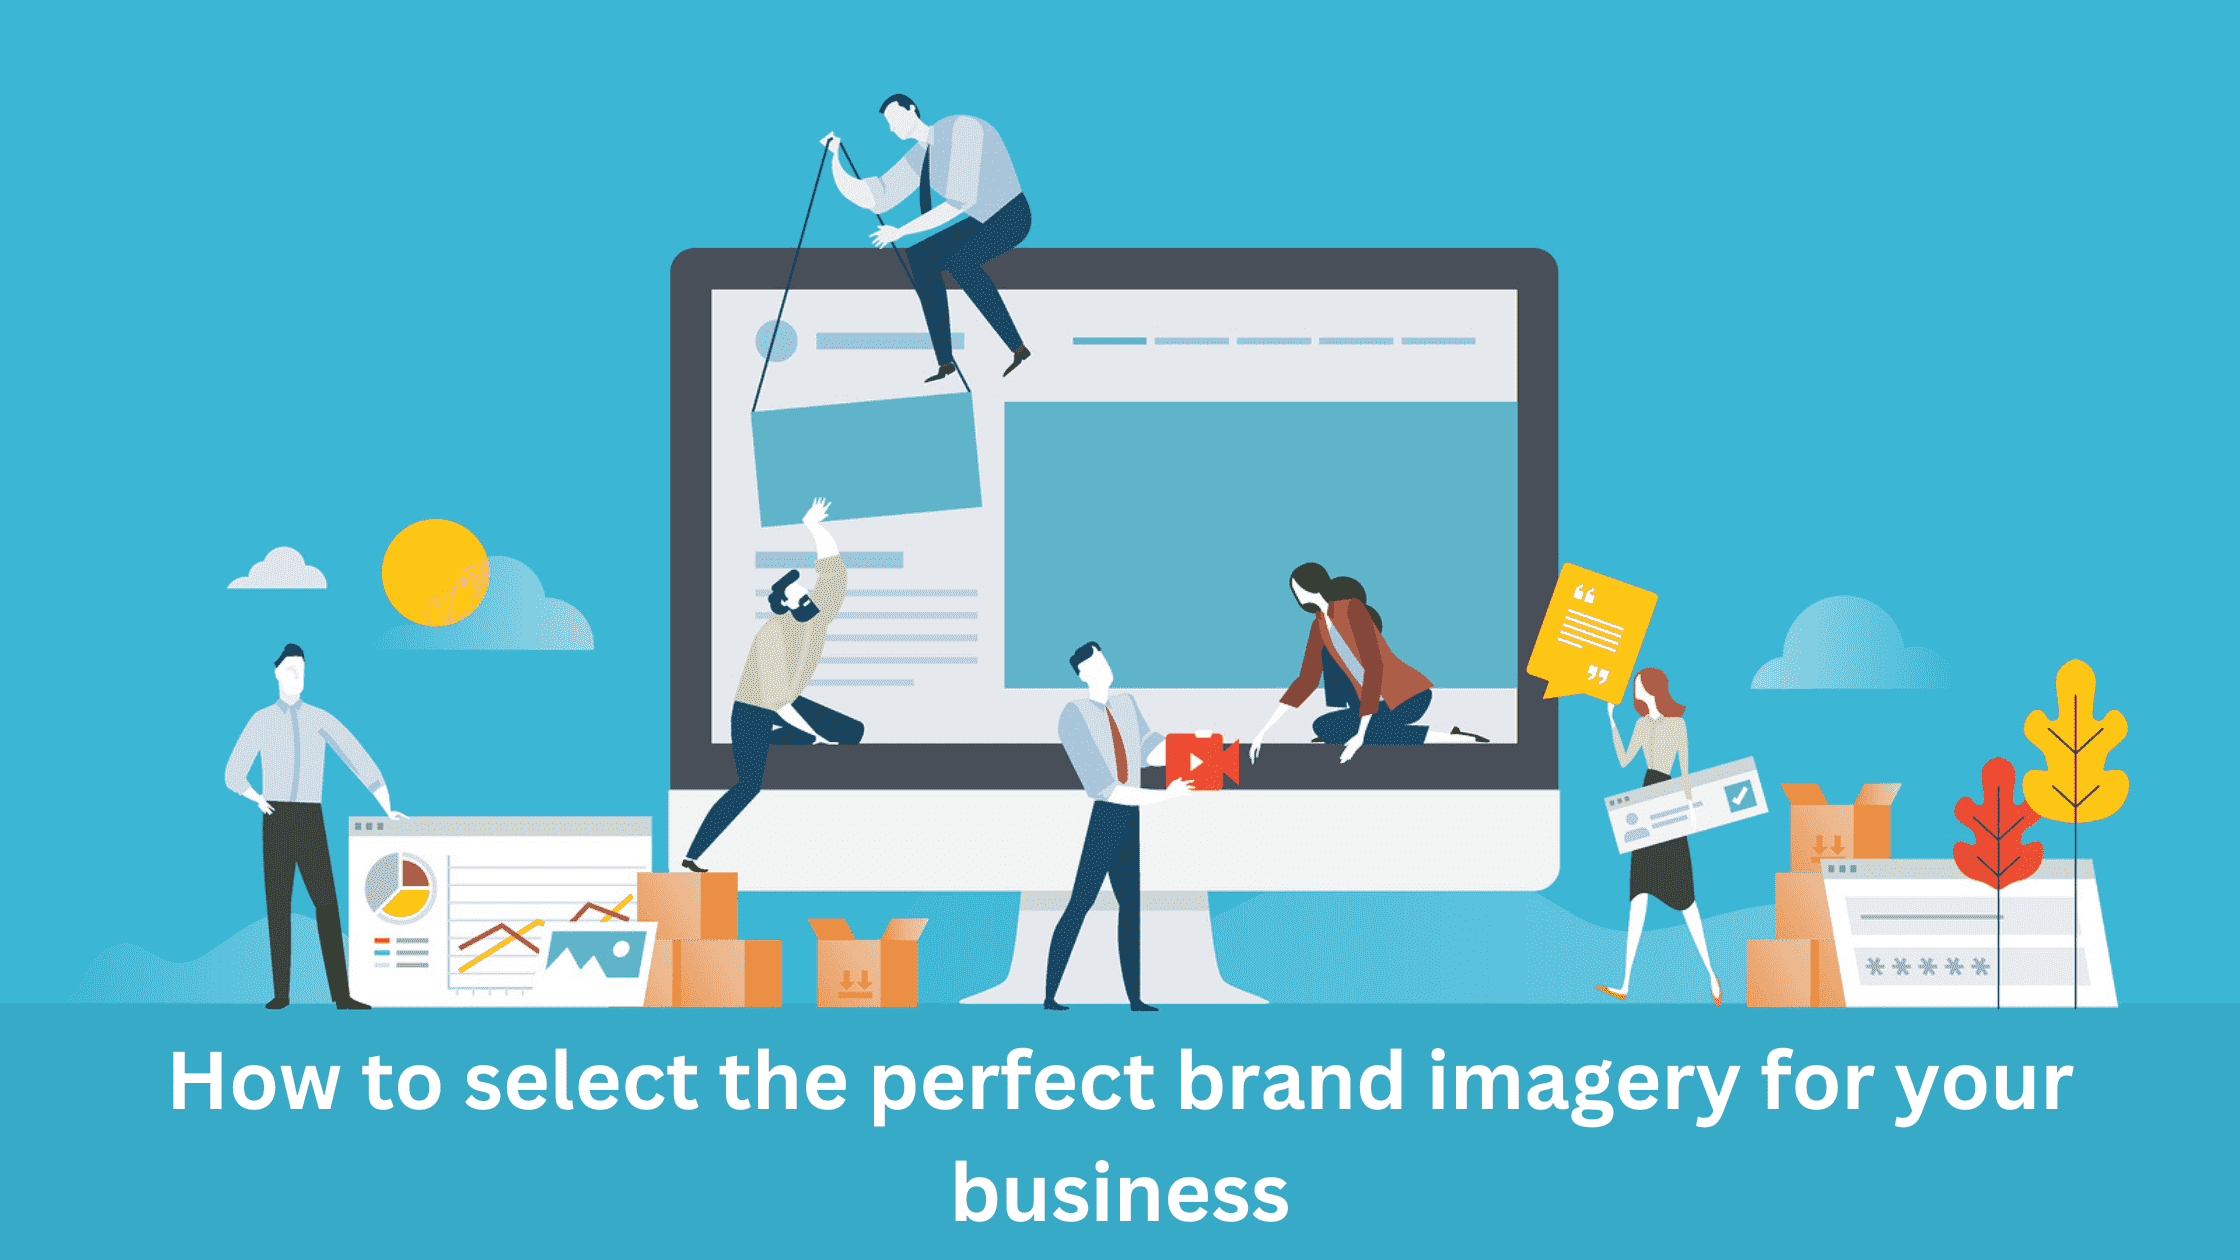 How to select the perfect brand imagery for your business